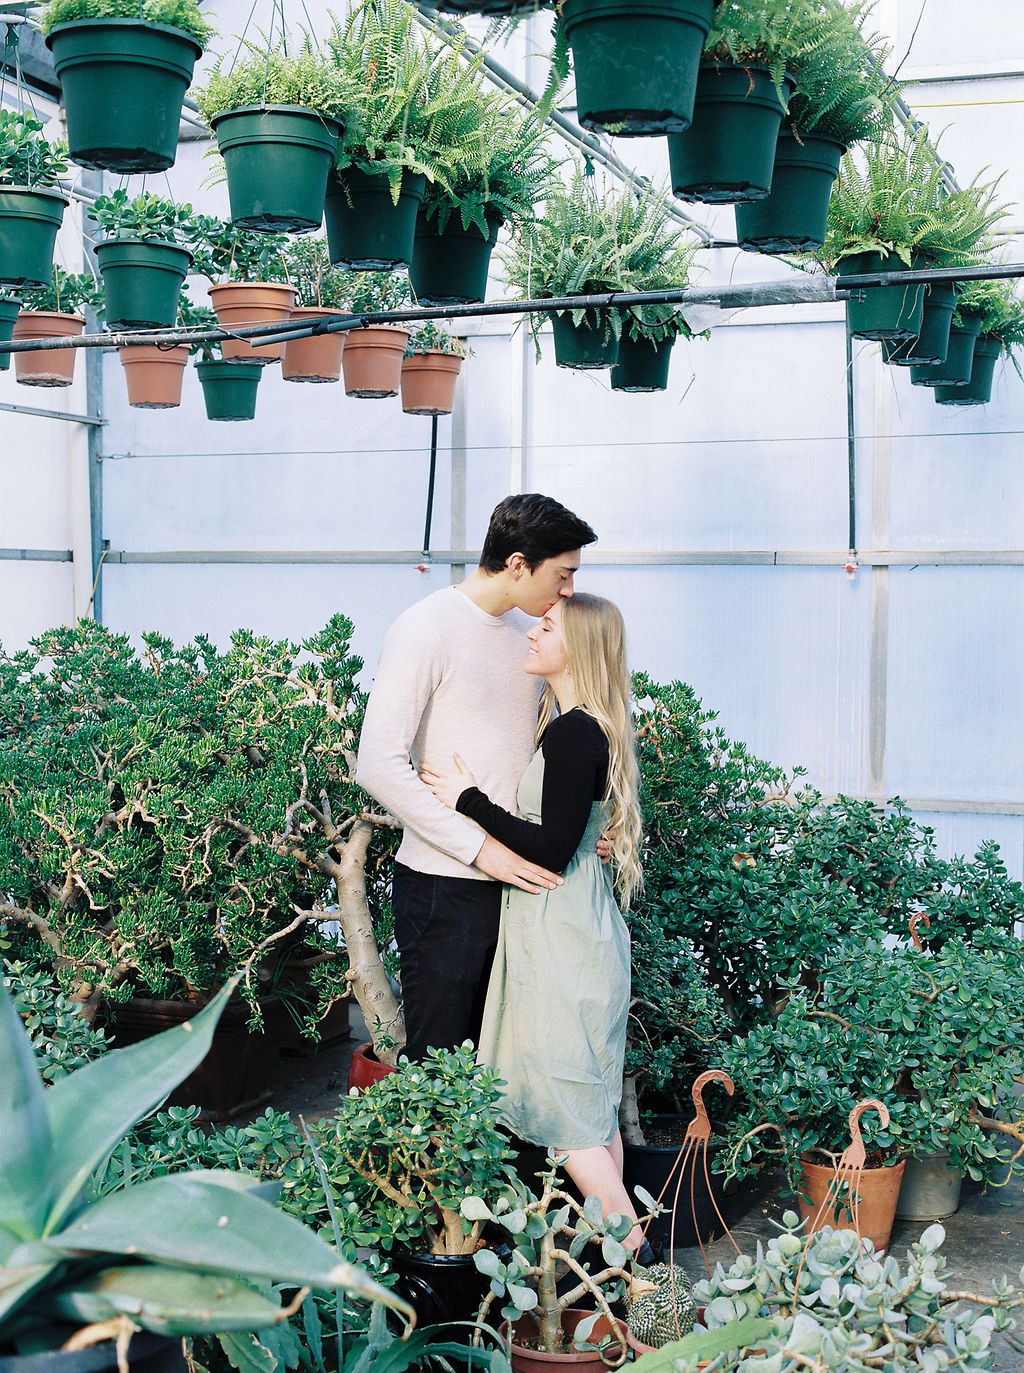 Engaged Couple Greenhouse Forehead Kiss